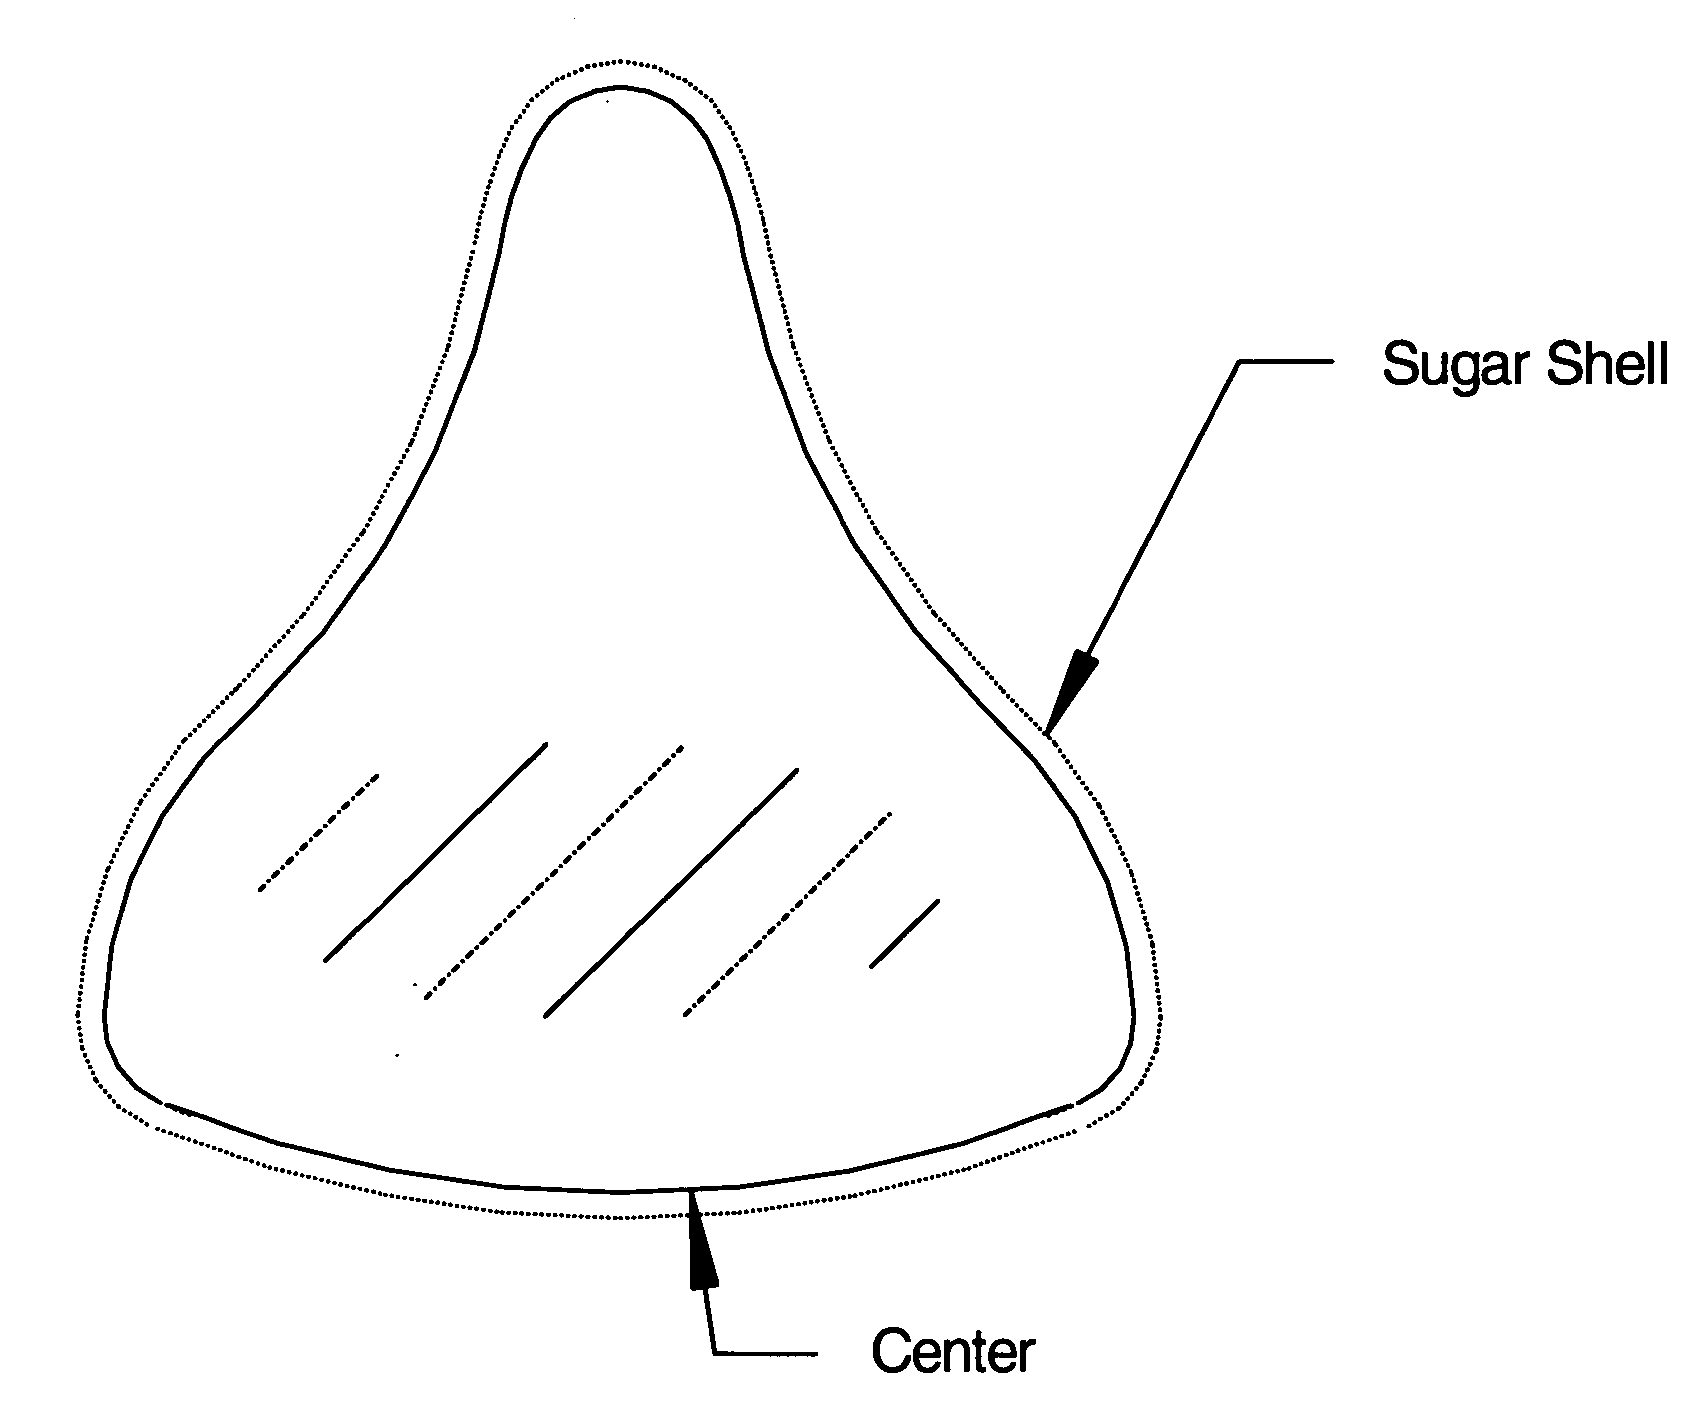 Process for preparing a sugar coating on an irregular shaped confection